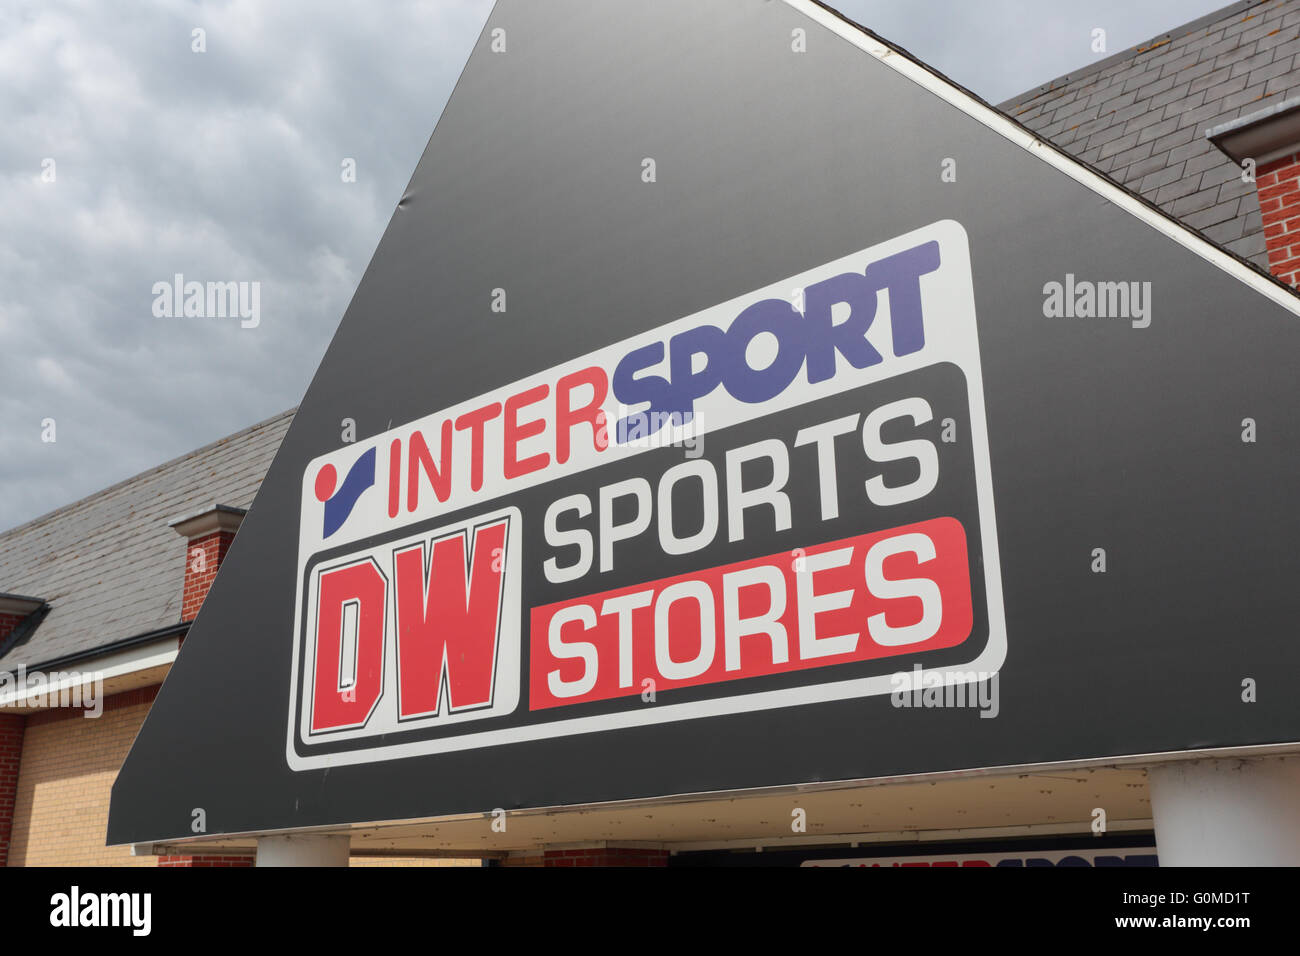 Intersport DW Sports Store signage Stock Photo